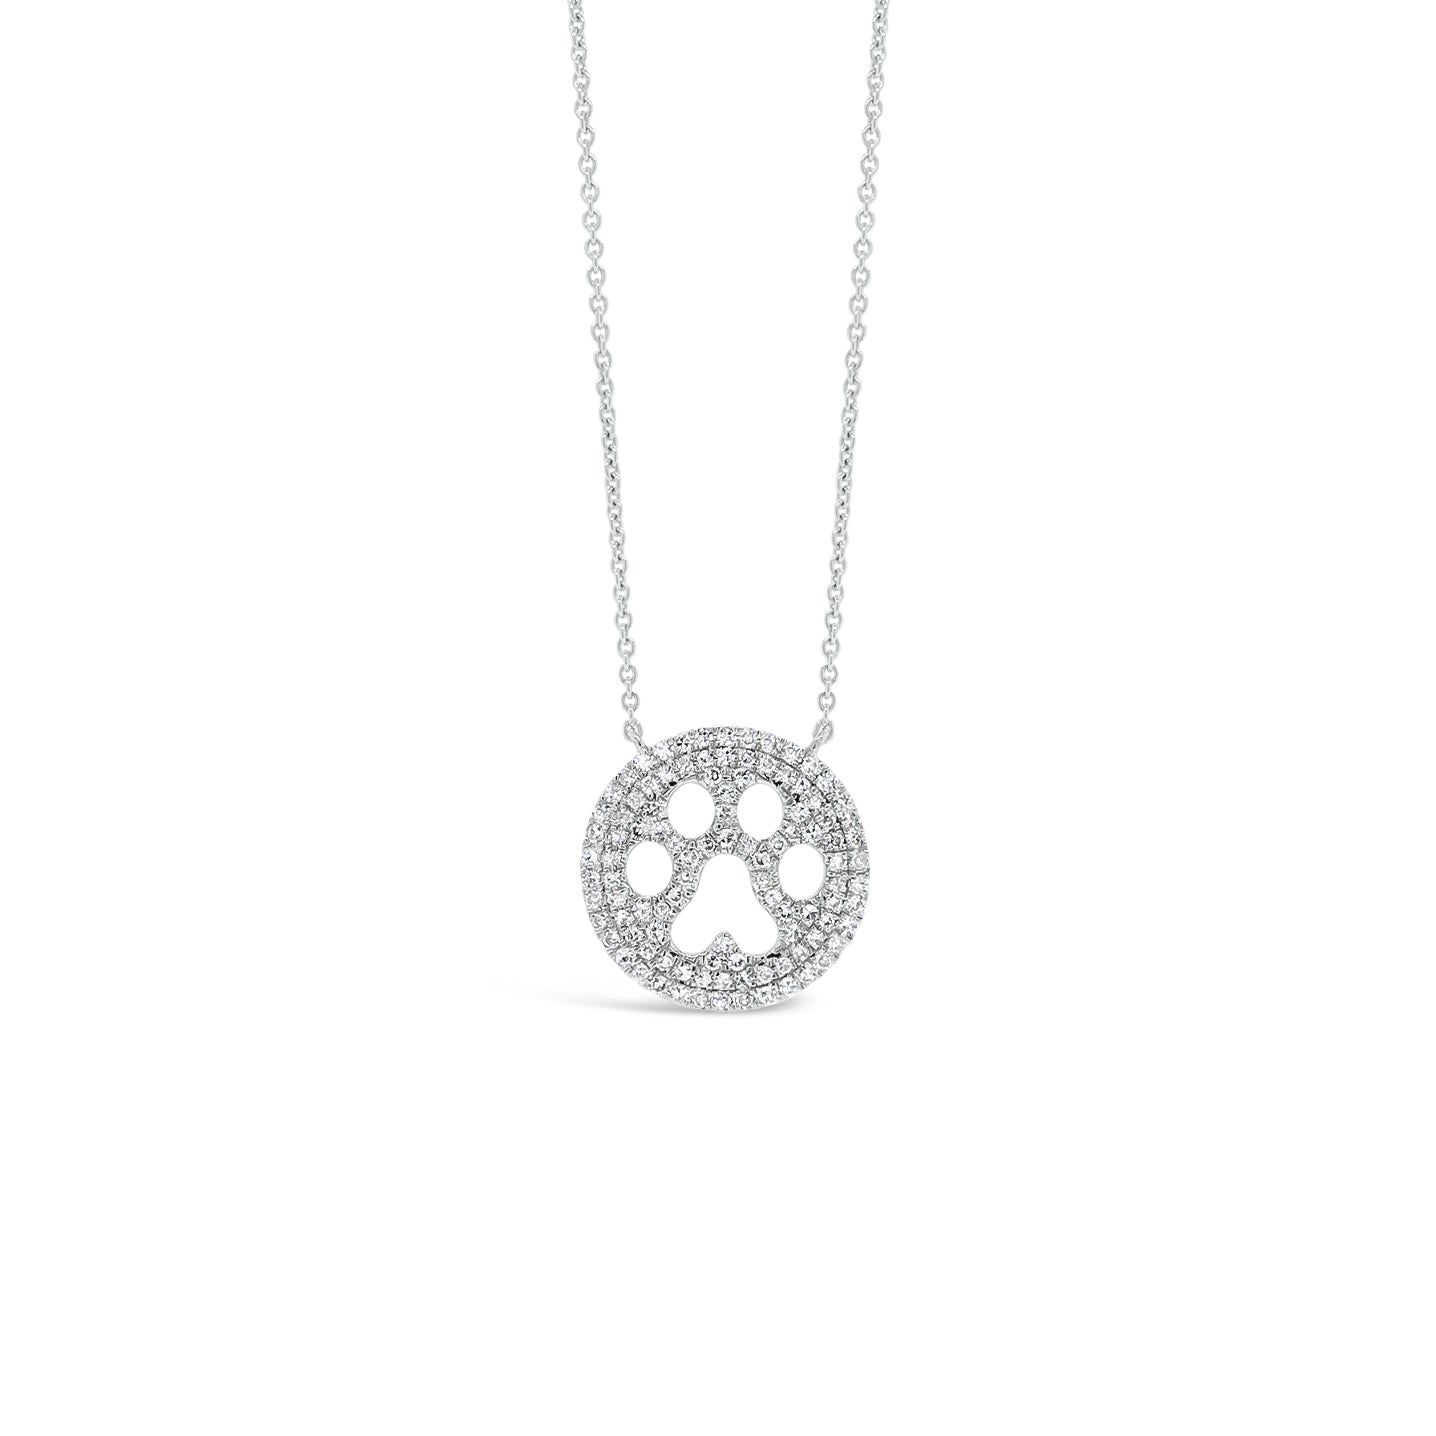 Solid 14K white gold weighing 2.34 grams with 102 round diamonds totaling 0.23 carats Paw Print Cutout Pendant | Nuha Jewelers